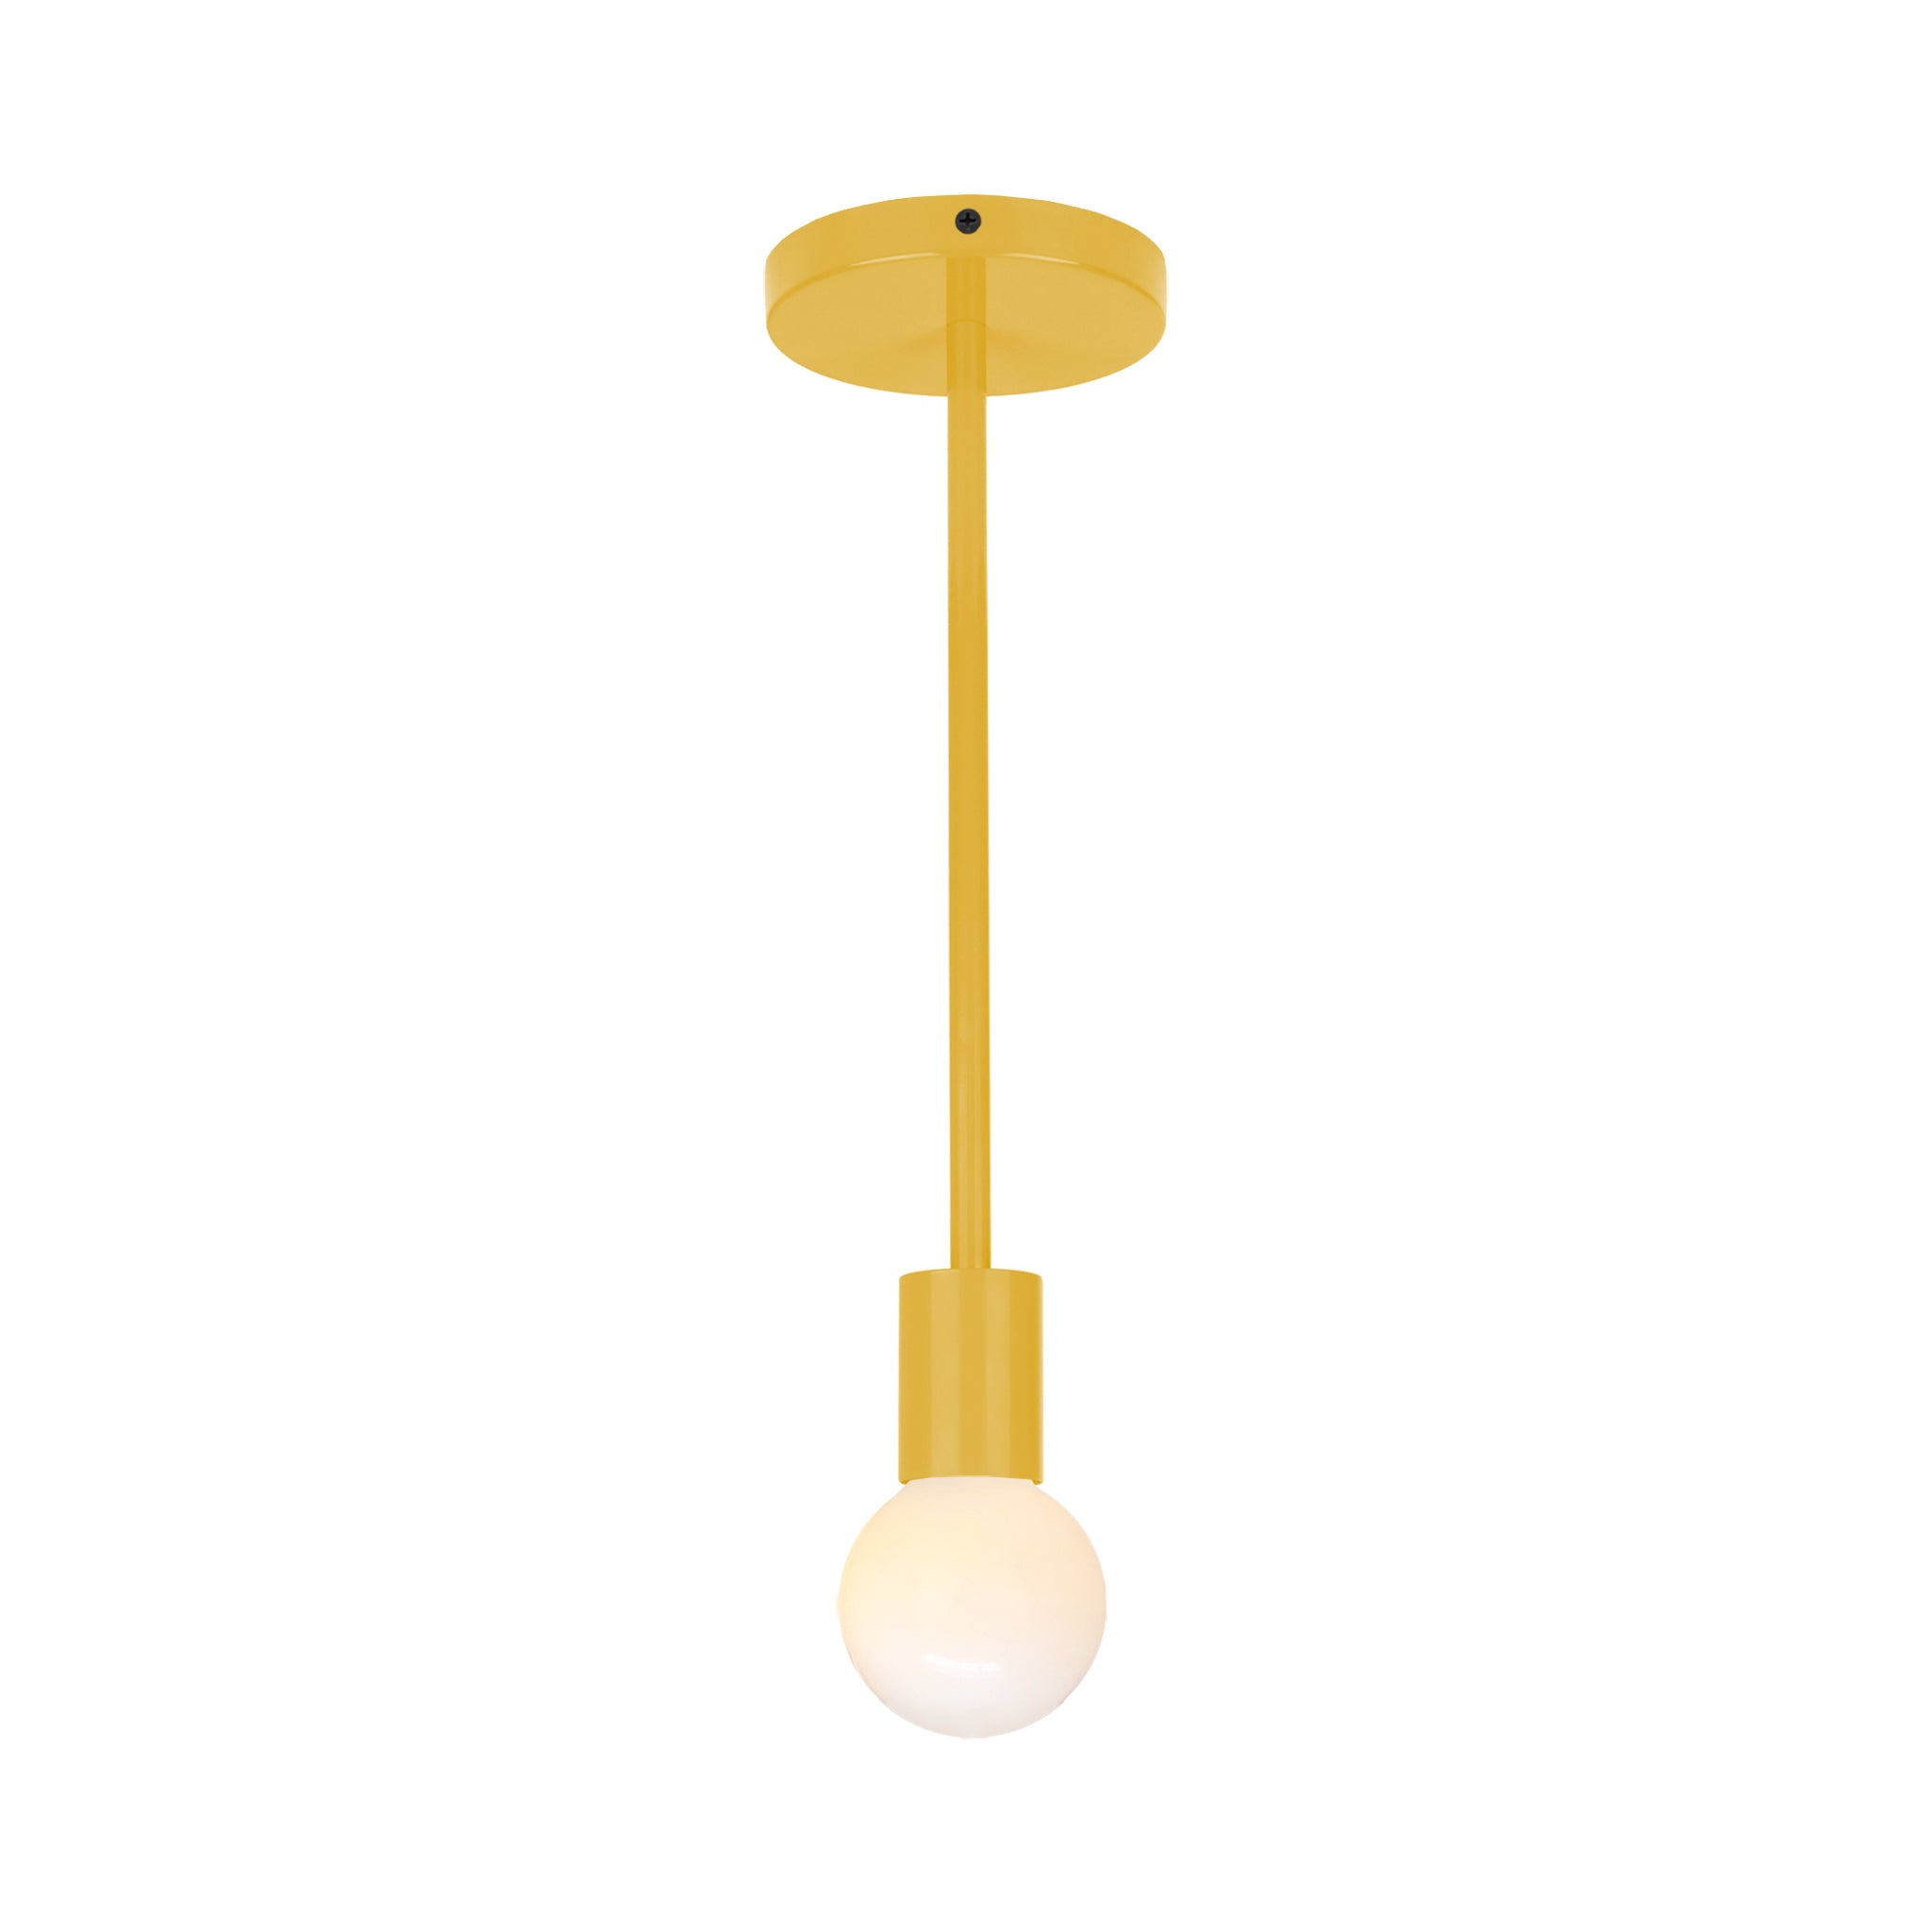 Black and ochre color Twink pendant Dutton Brown lighting